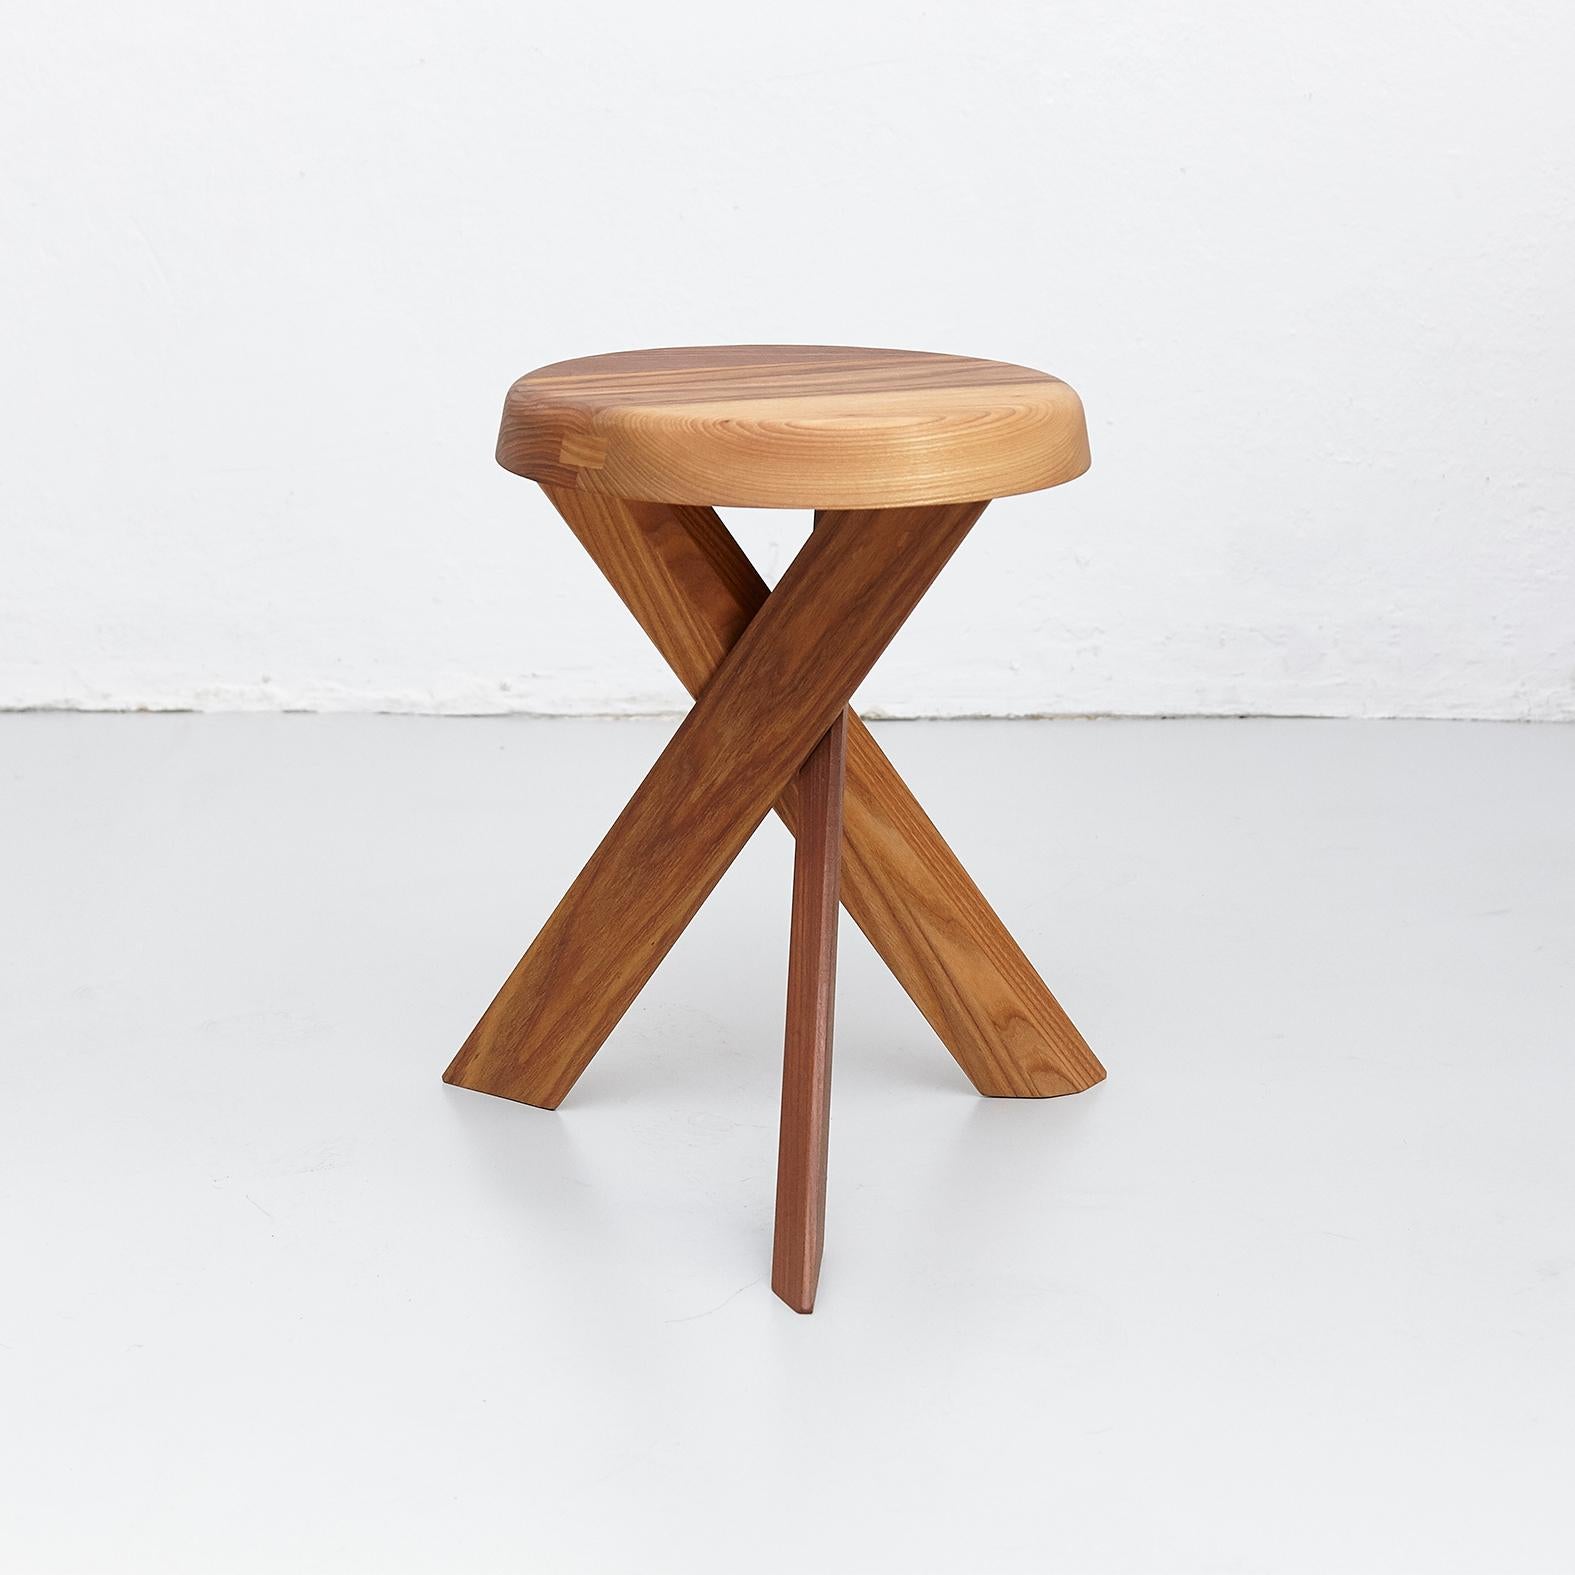 S 31 a stool designed by Pierre Chapo, circa 1960.
Manufactured by Chapo Creation in France, 2019.
Solid elmwood.

In good original condition, with minor wear consistent with age and use, preserving a beautiful patina.

Pierre Chapo is born in